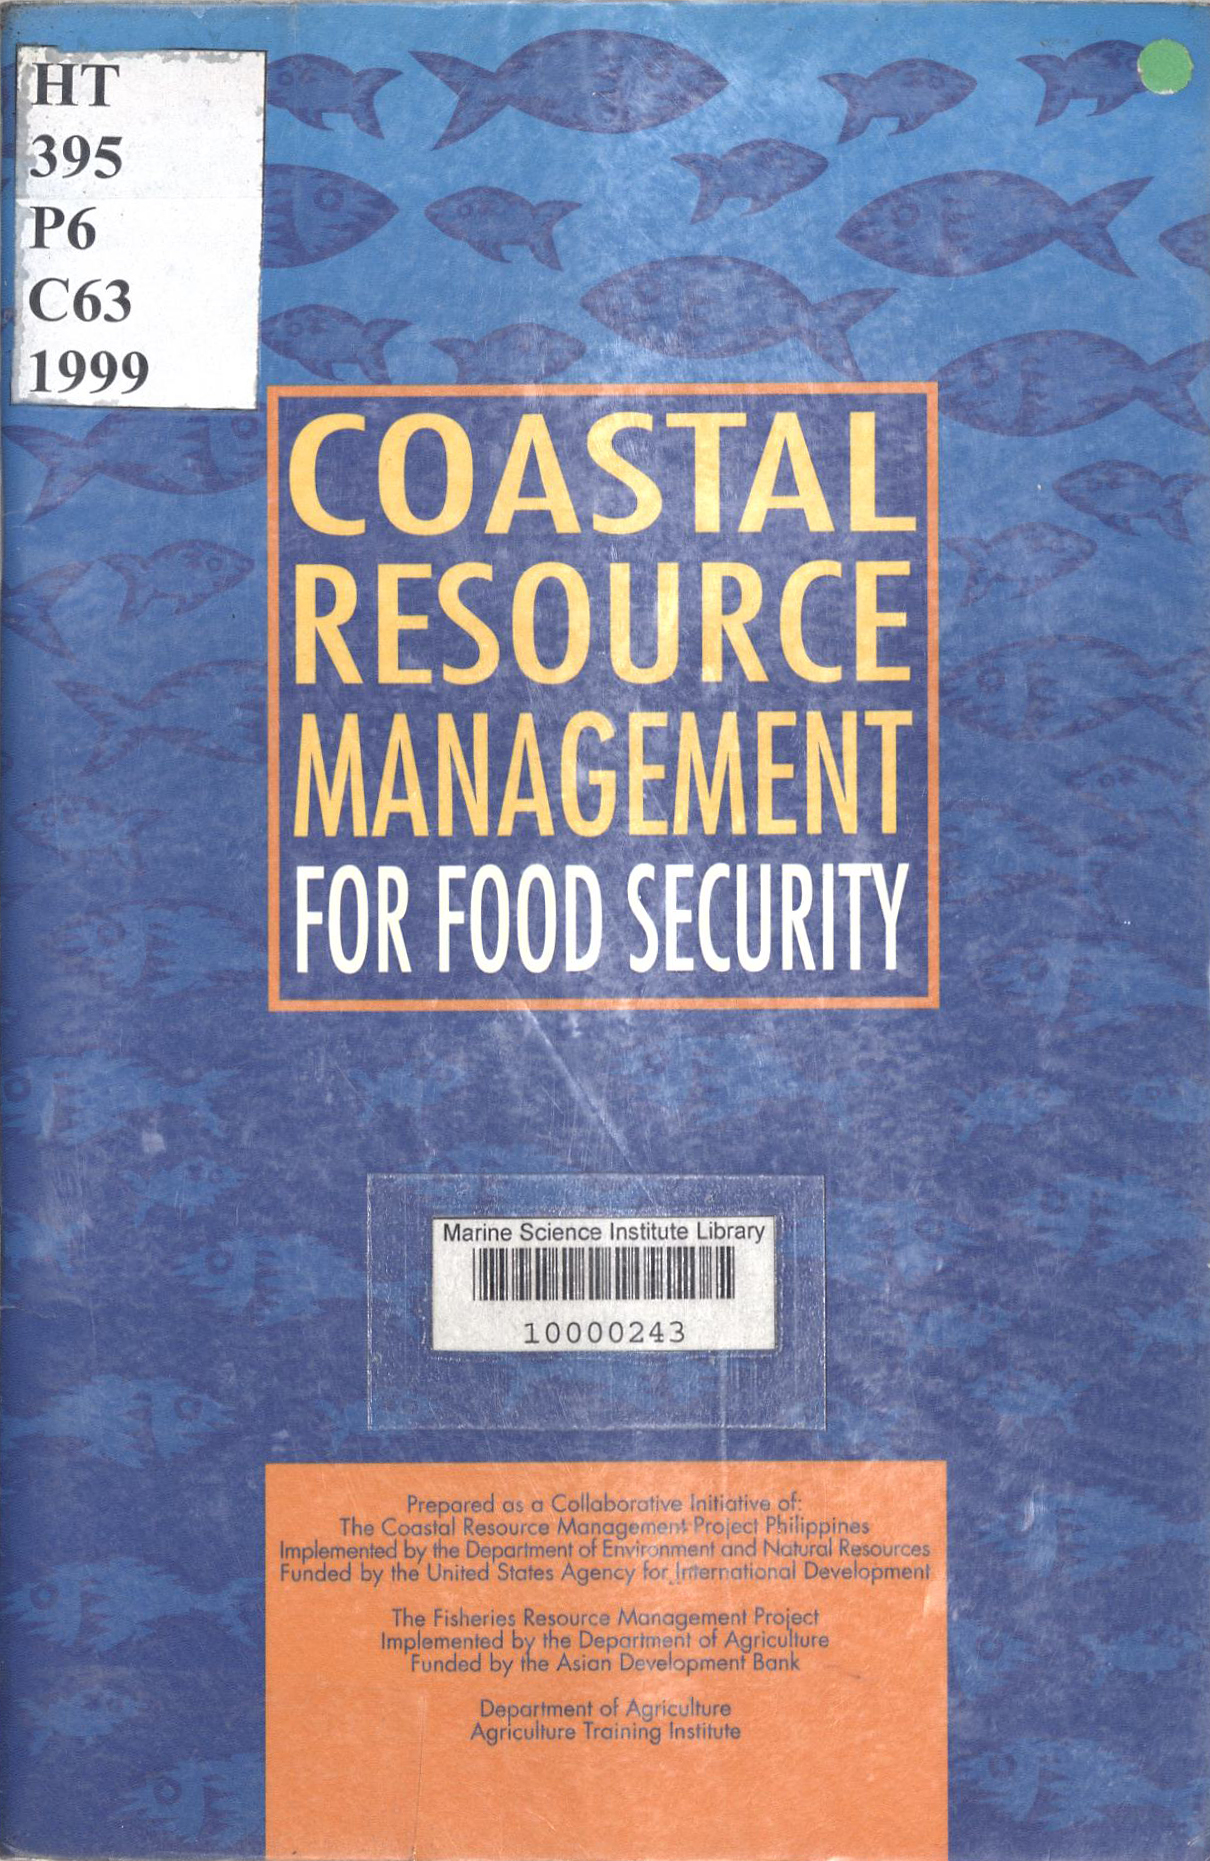 Coastal resource management for food security.